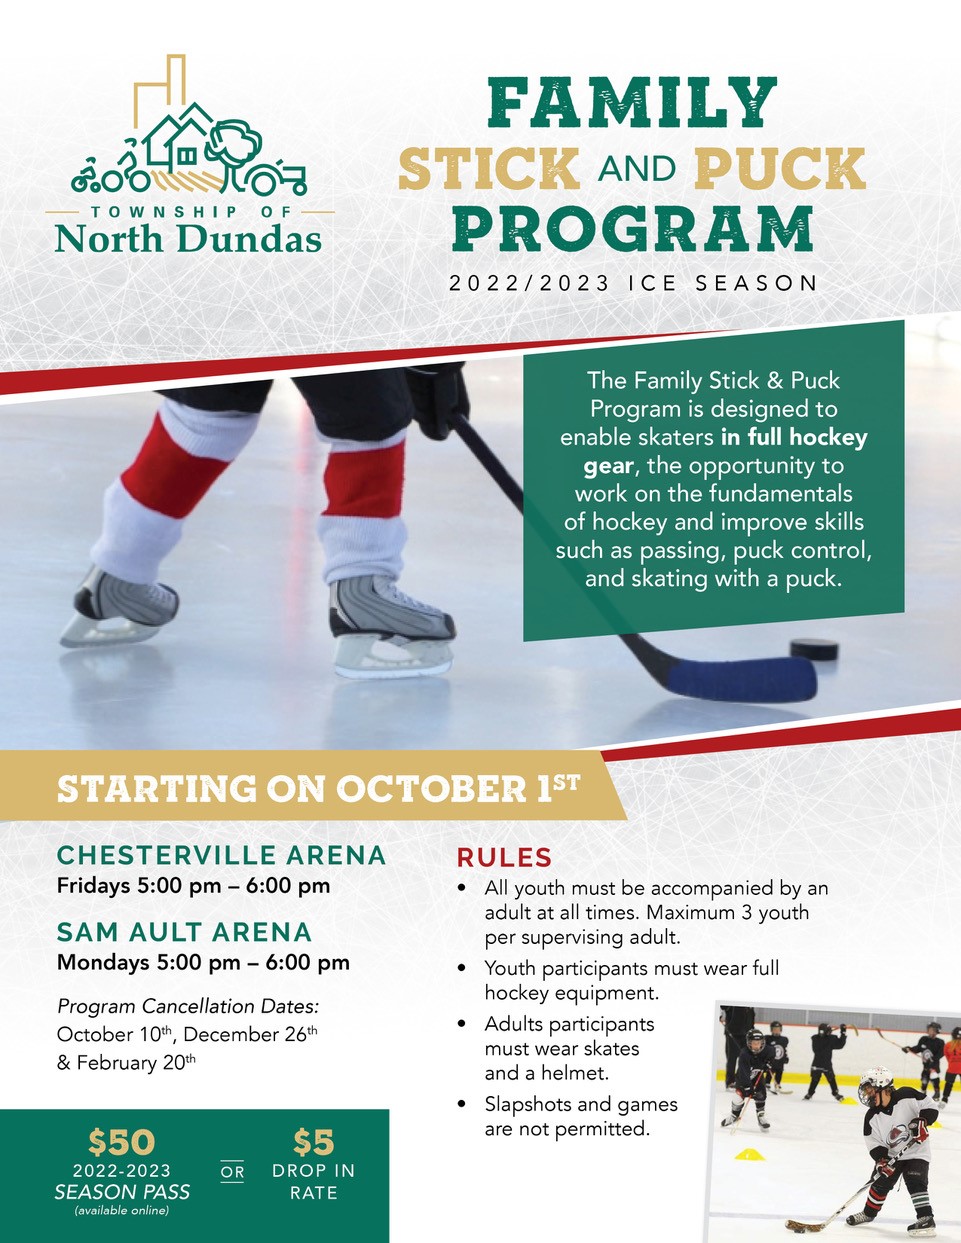 Stick Puck 2022-2023 Poster with green and gold text and image of hockey player